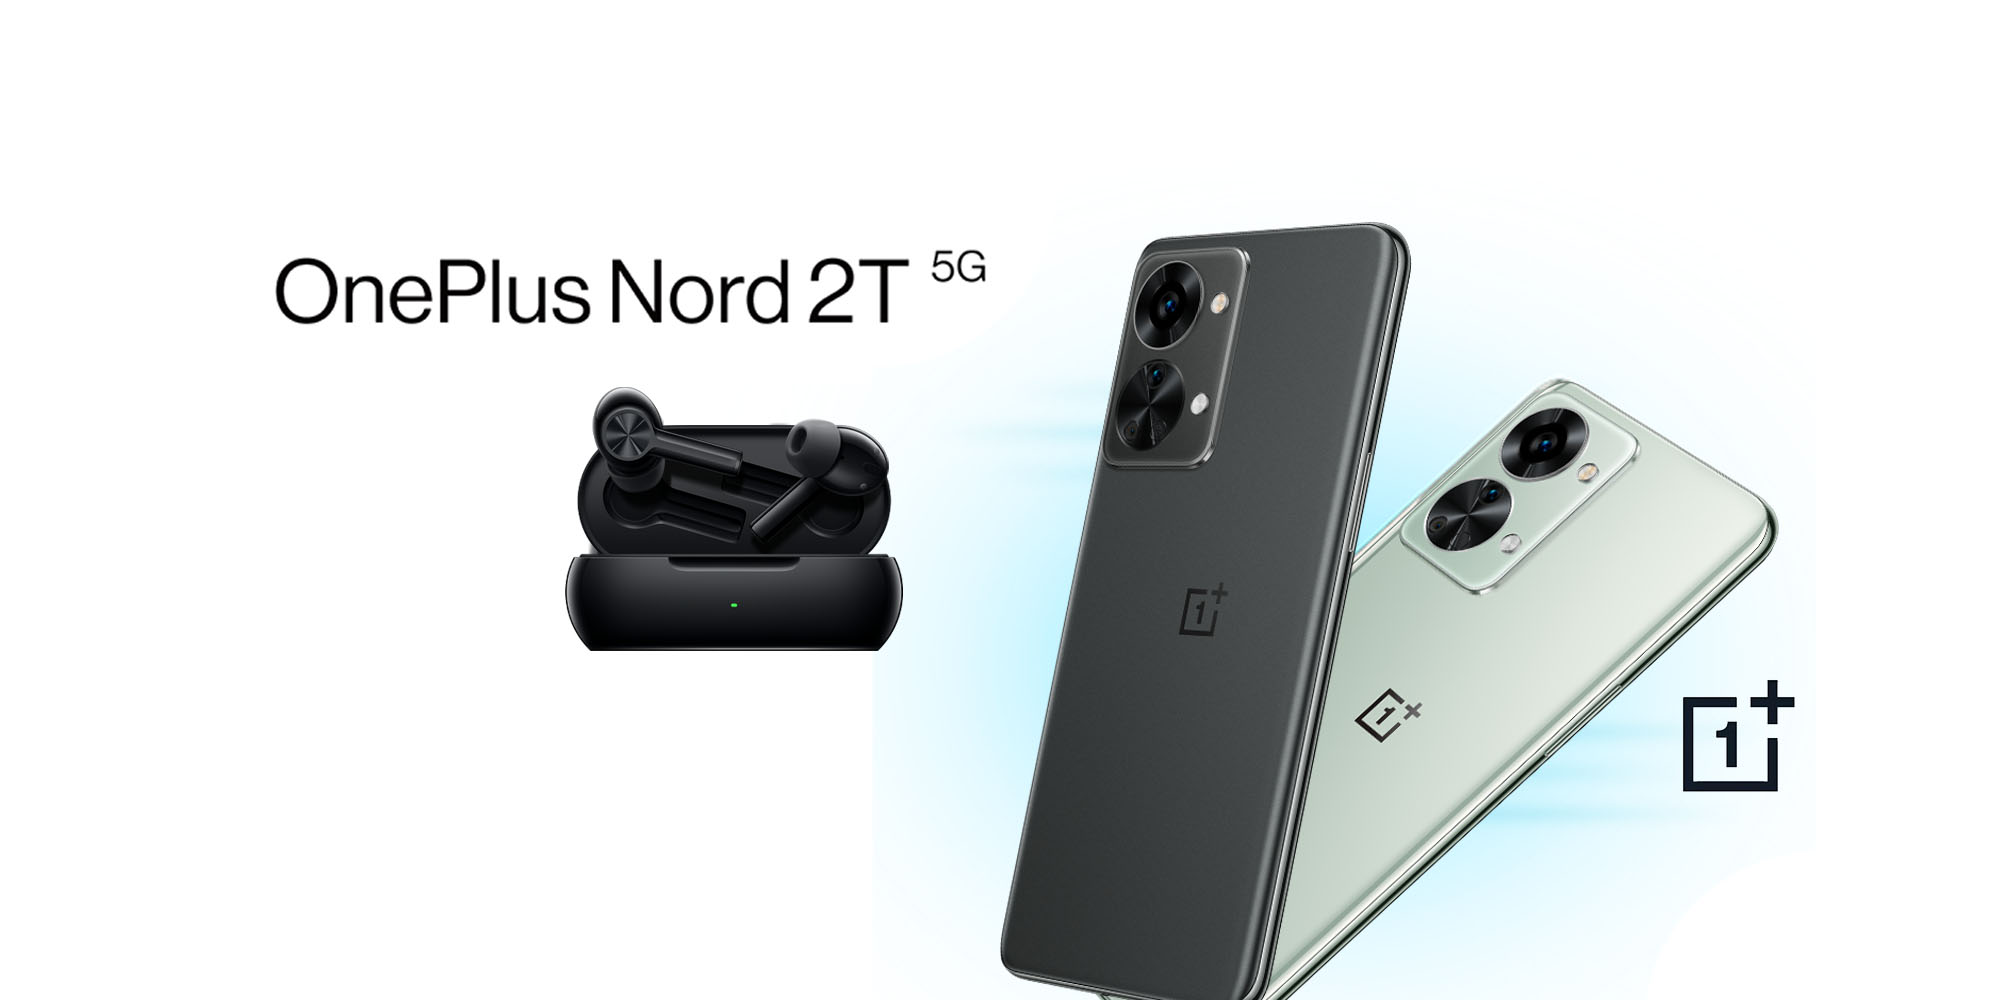  OnePlus Nord 2T 8/128GB 5G